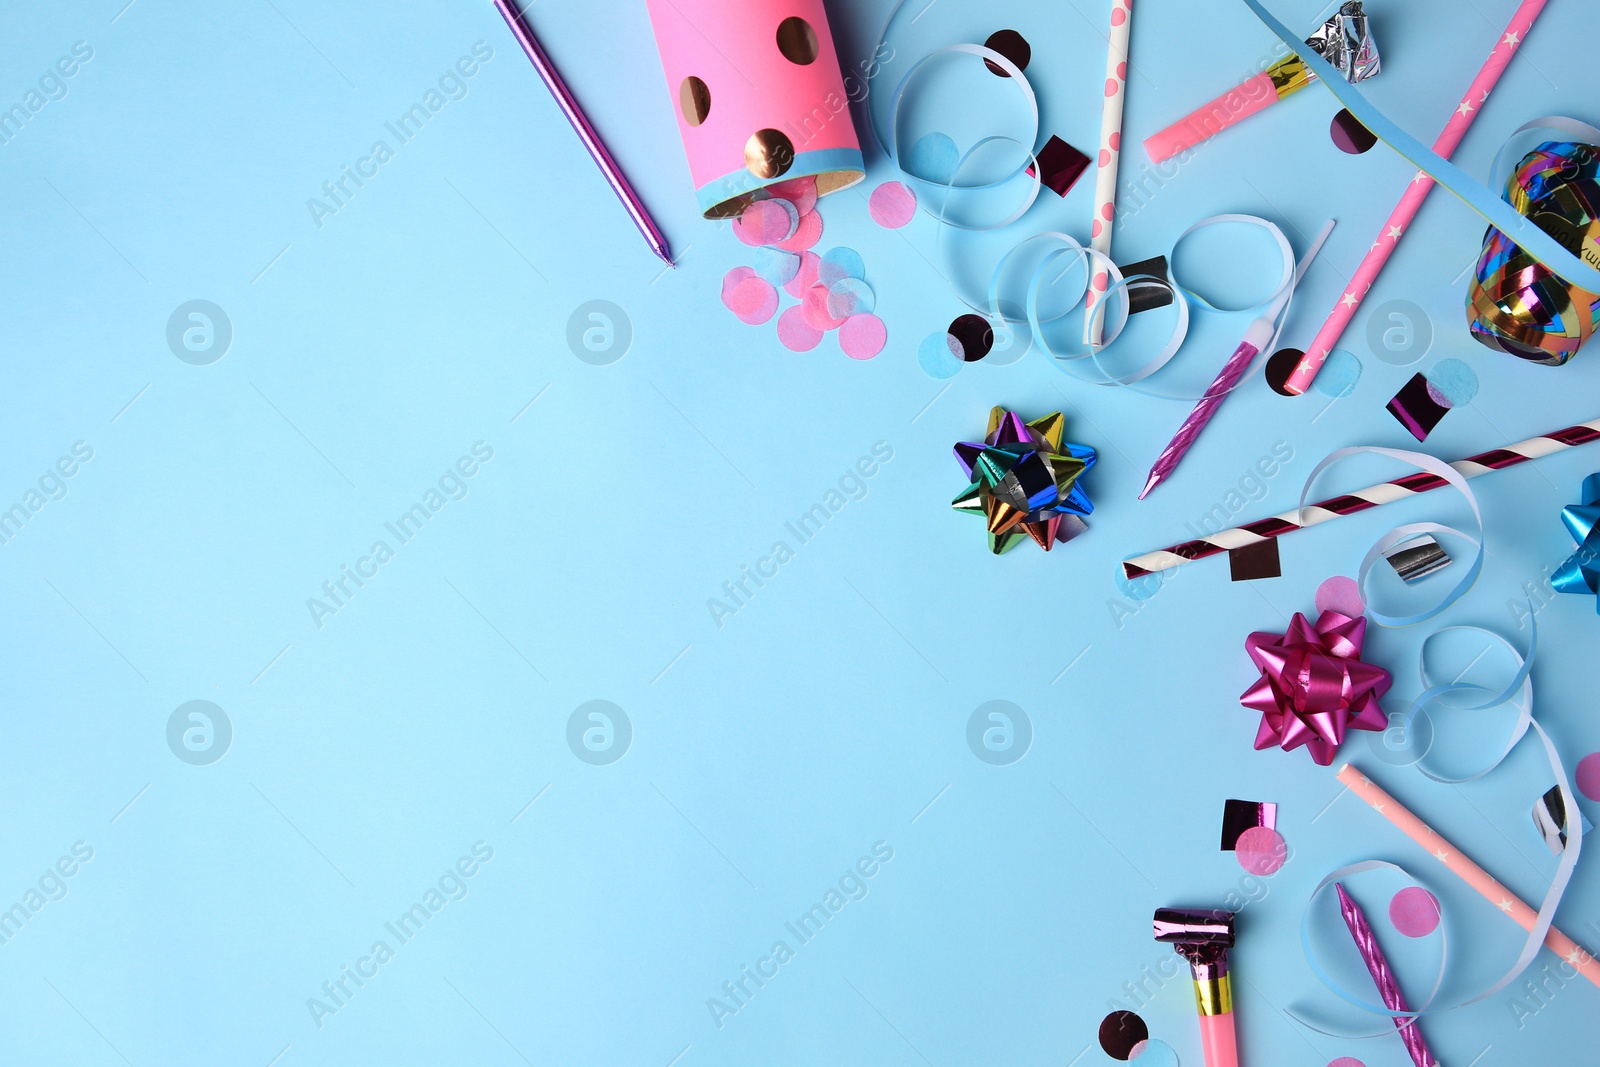 Photo of Party popper with confetti, blower and festive decor on light blue background, flat lay. Space for text